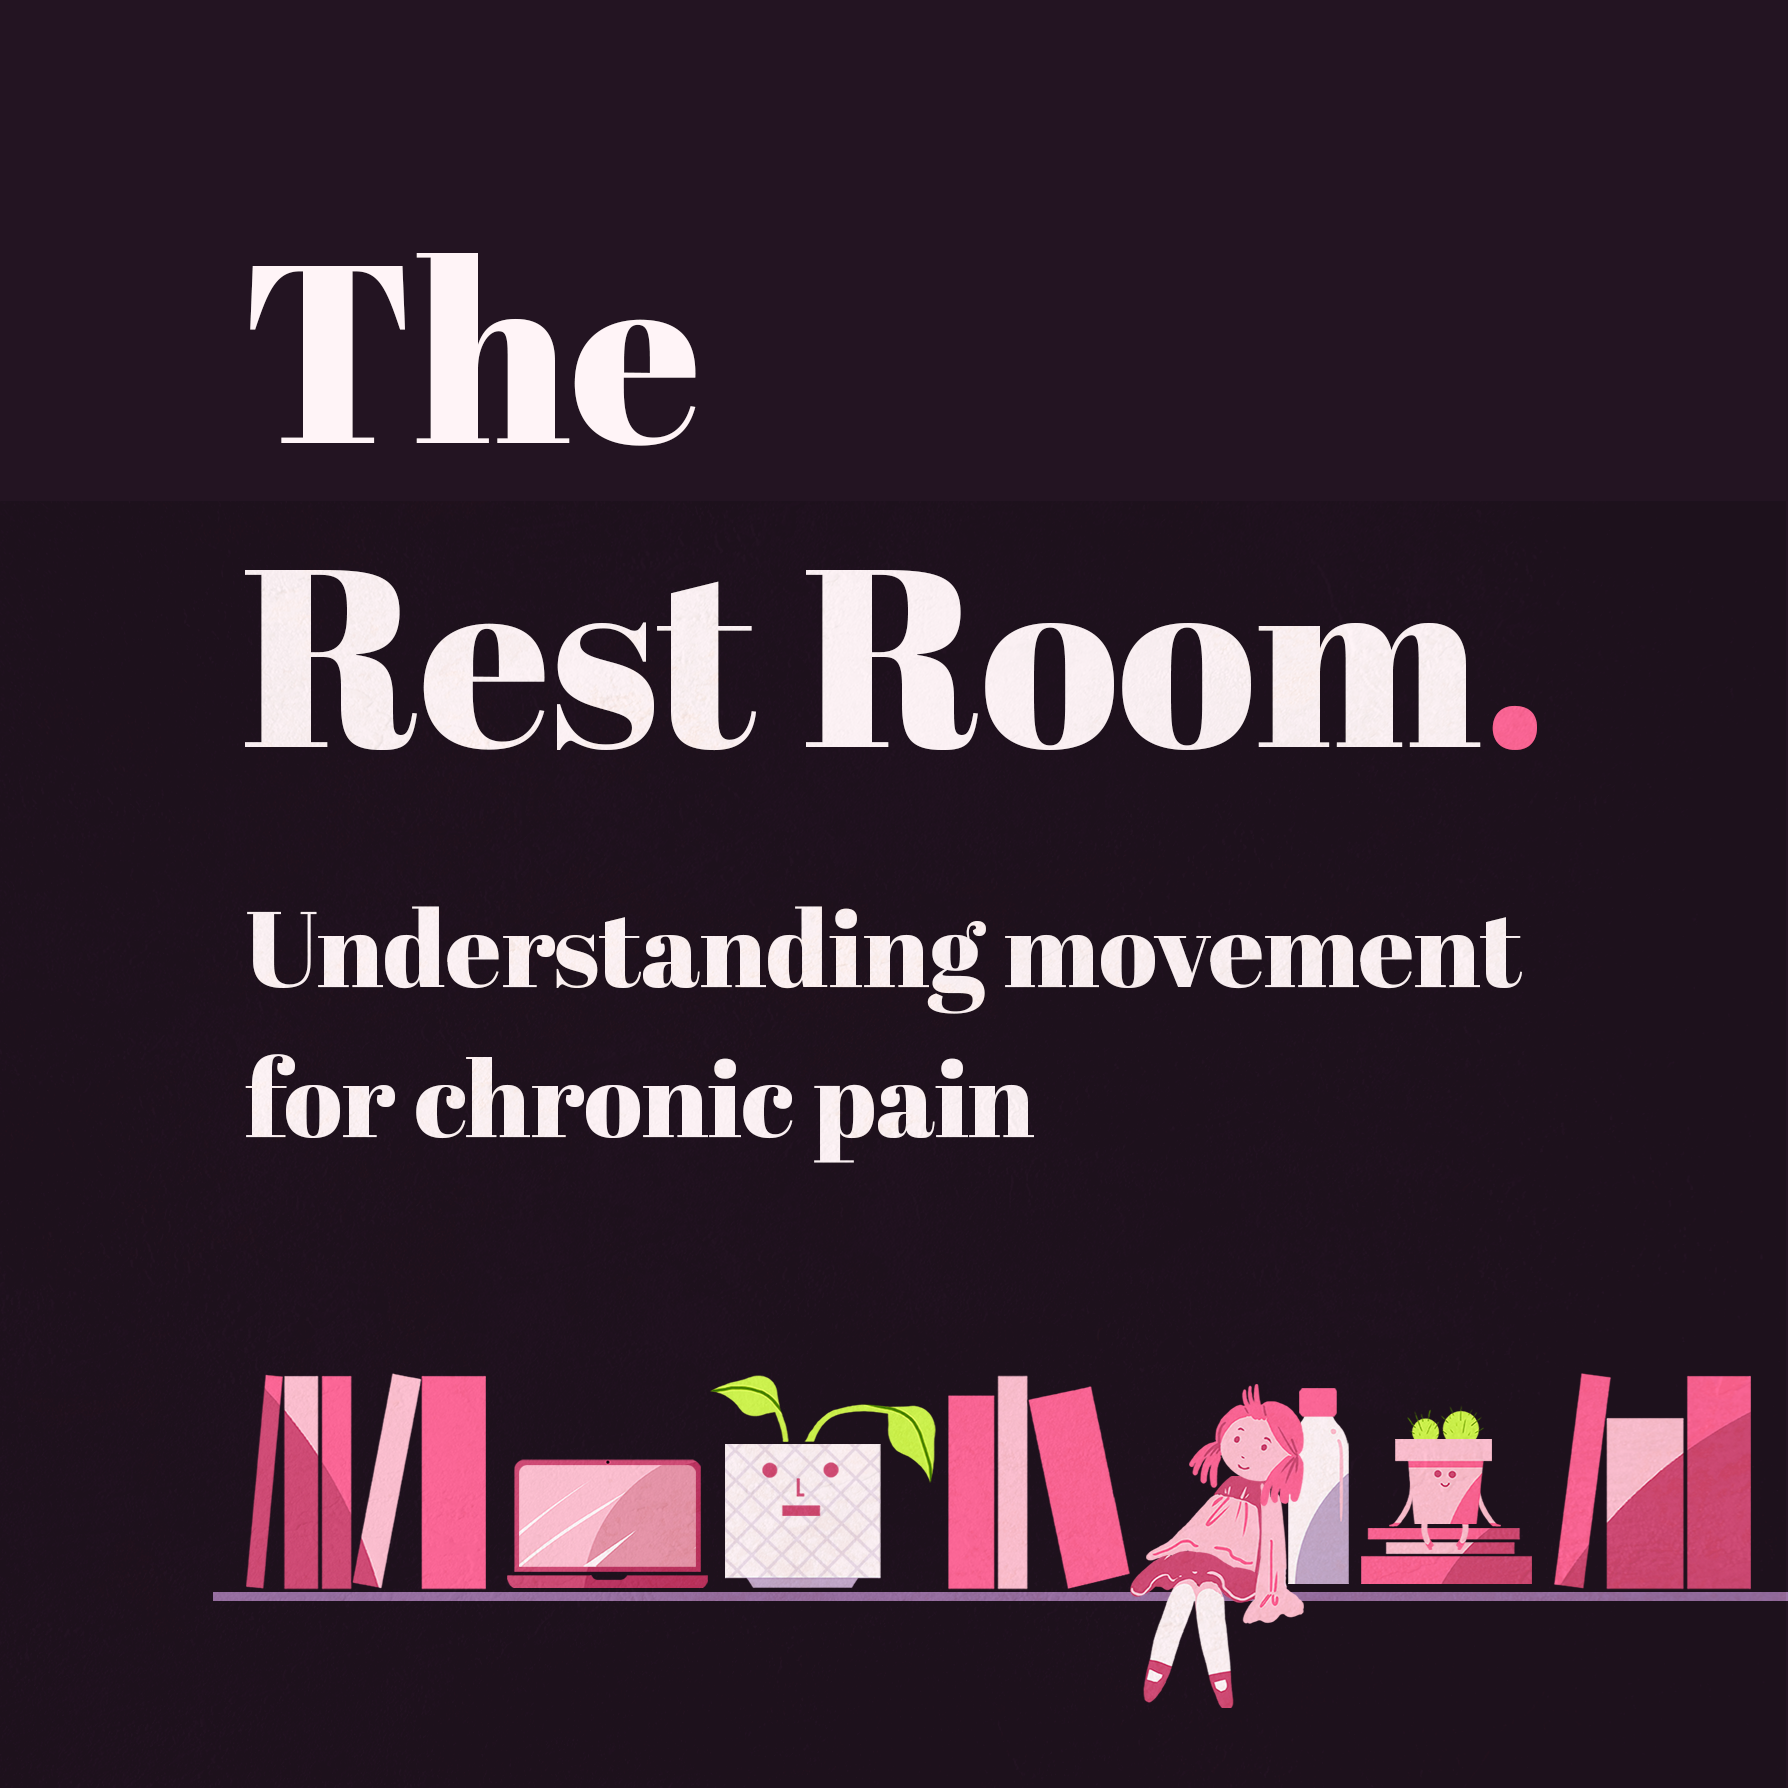 White text on a deep purple background reads: 'The Rest Room' with a small pink full stop next to the word room. Underneath in slightly smaller font, text reads: "understanding movement for chronic pain". Along the bottom of the image is a shelf with pink illustrations: 4 books, a laptop, a white plant pot with an unsmiling face and green leaves poking out, some more books, a pink dolls, leaning casually against a white water bottle, some books lying flat piled on top of each other with a cute succulent with a smiling face pot perched on top, and more books.